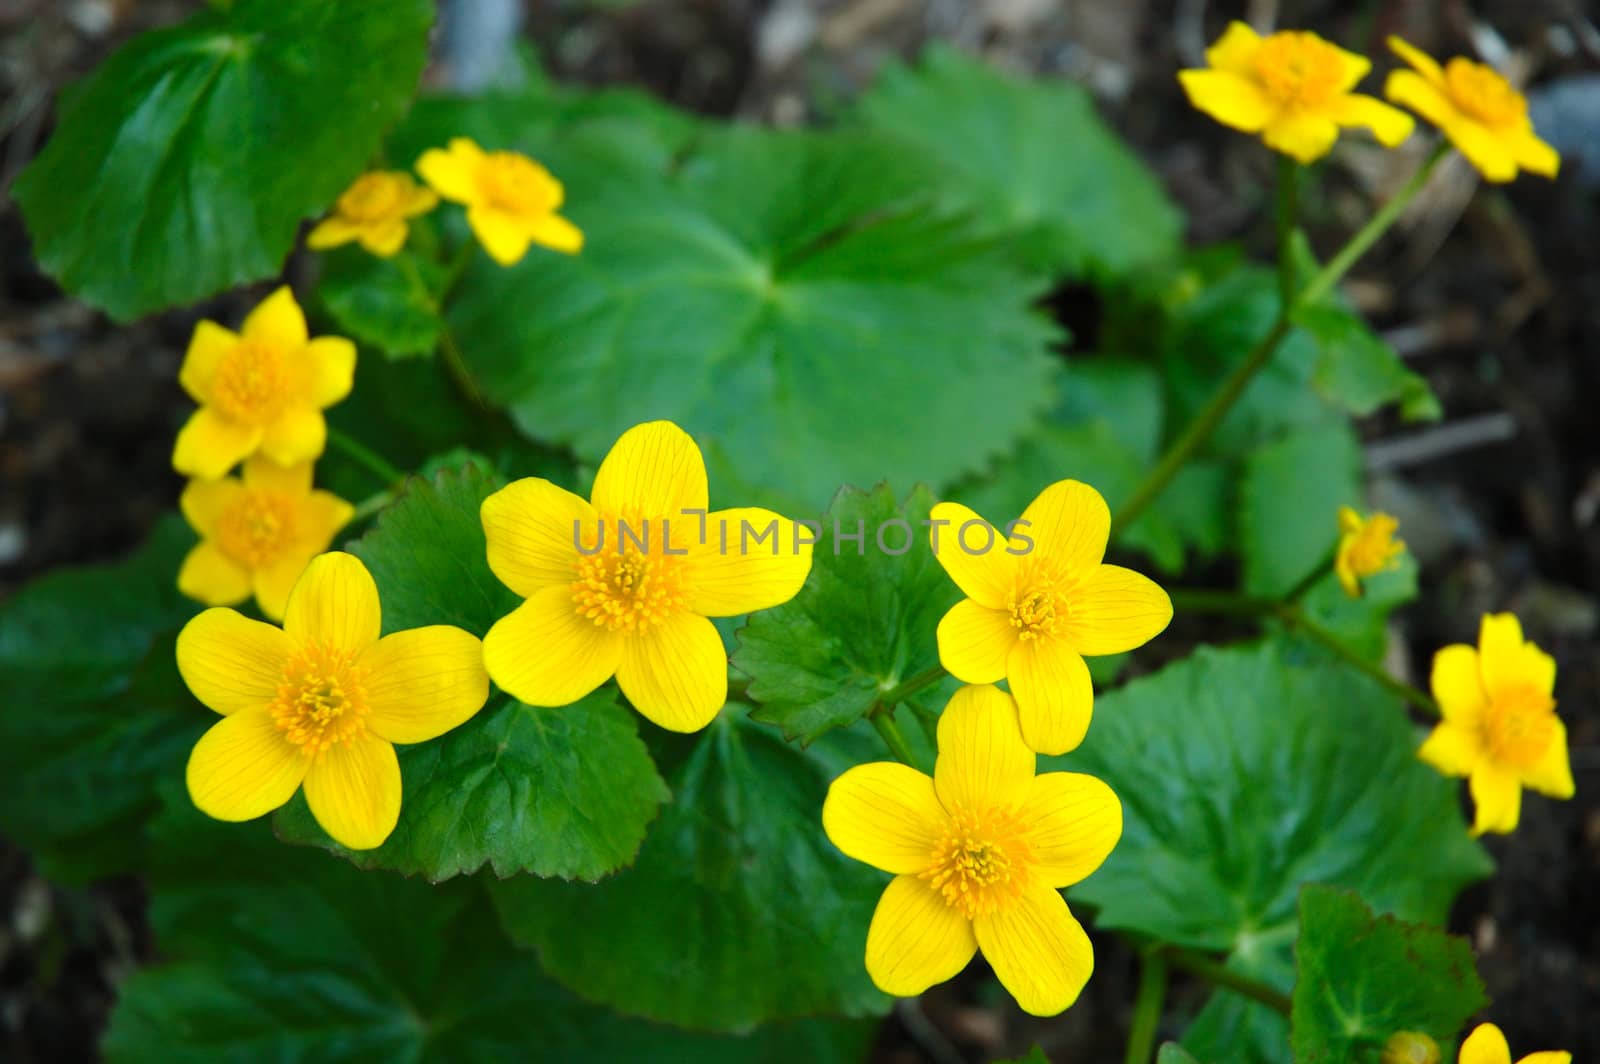 Yellow-cup or known as buttercup (Ranunculus) flower.